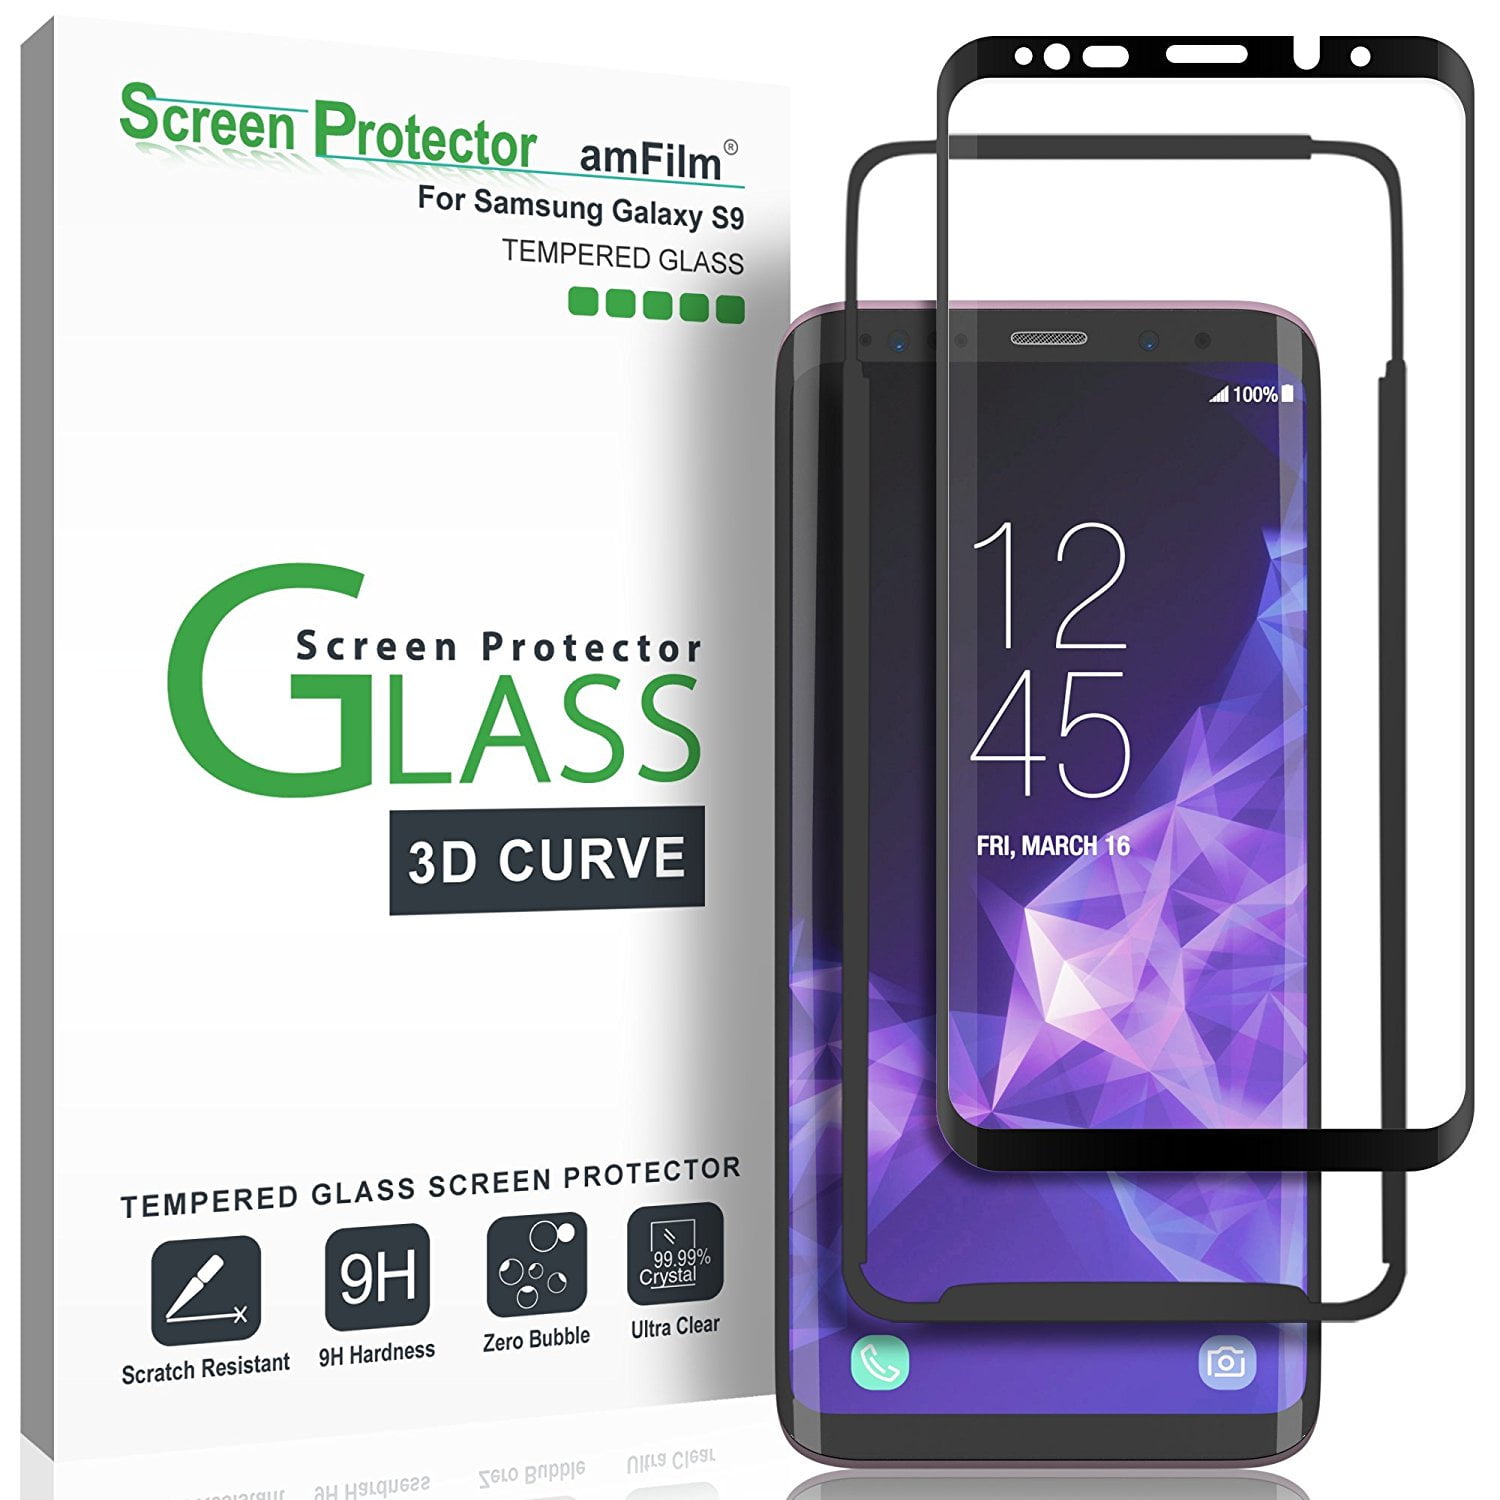 Galaxy J7 2016 Tempered Glass Screen Protector Anti Scratch Screen Protector Glass for Samsung Galaxy J7 2016 1 Pack Bear Village Ultra Clear Screen Protector 